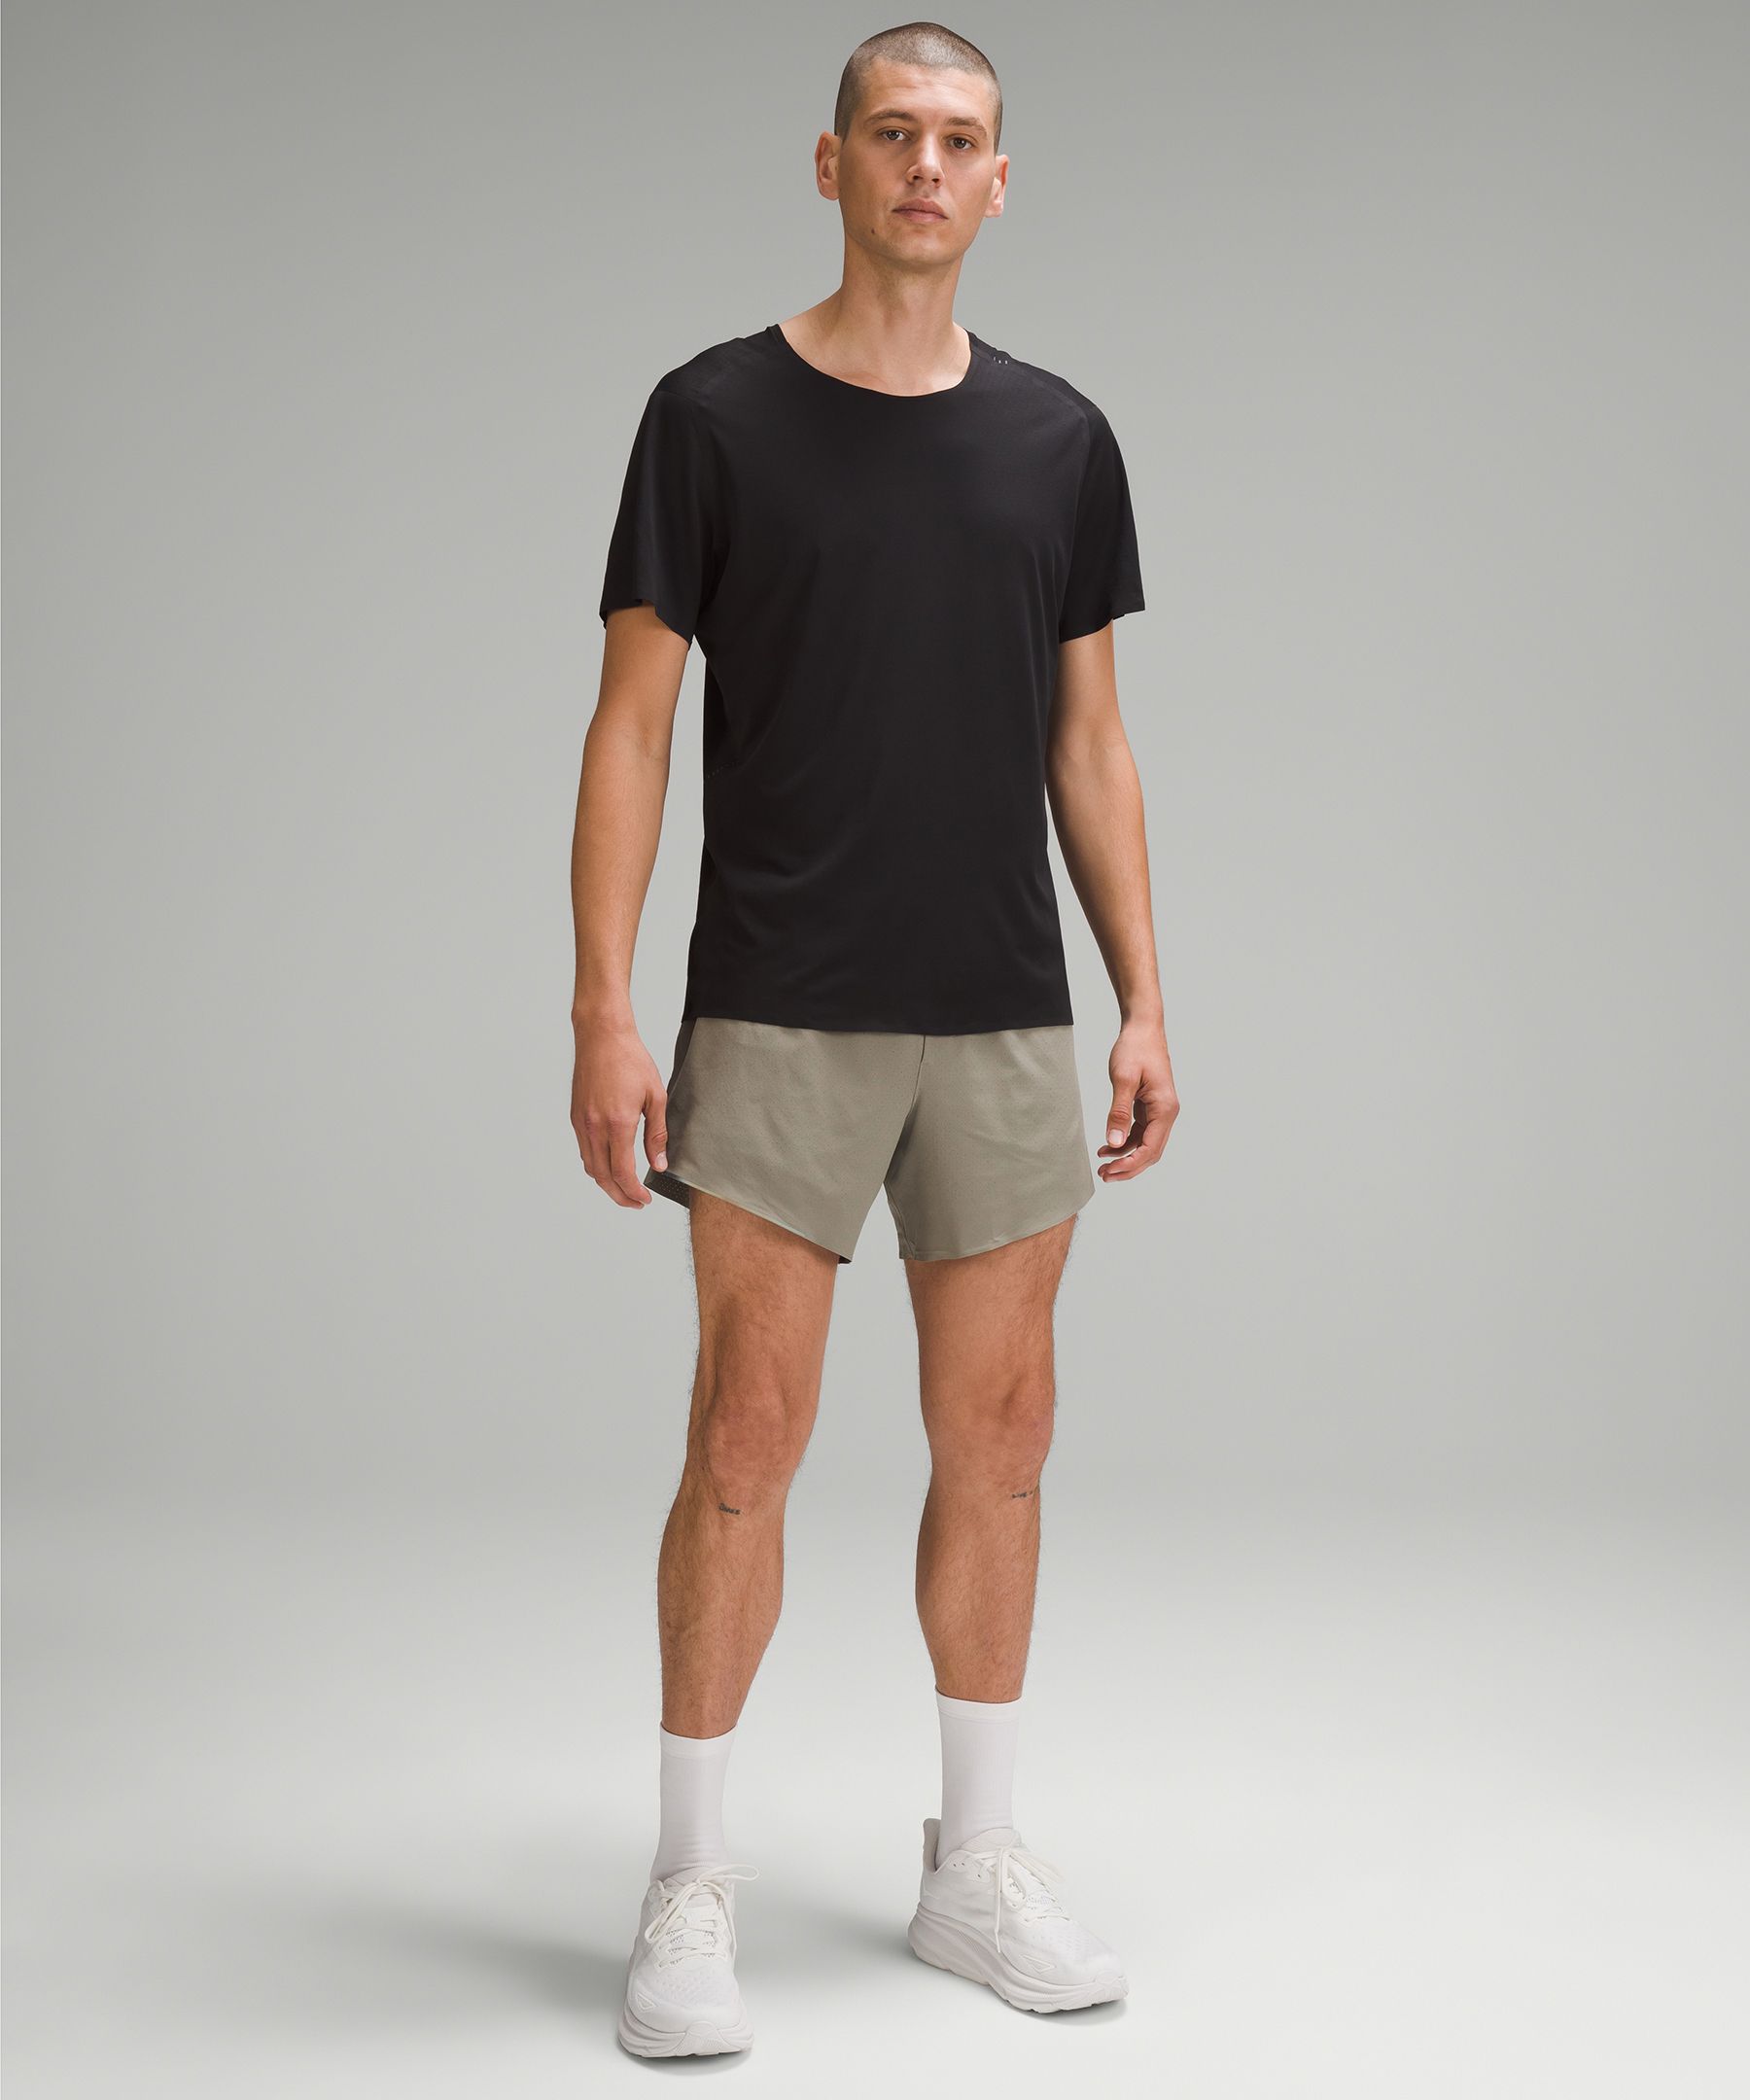 Lululemon Fast and Free Short 6 - Lined – The Shop at Equinox